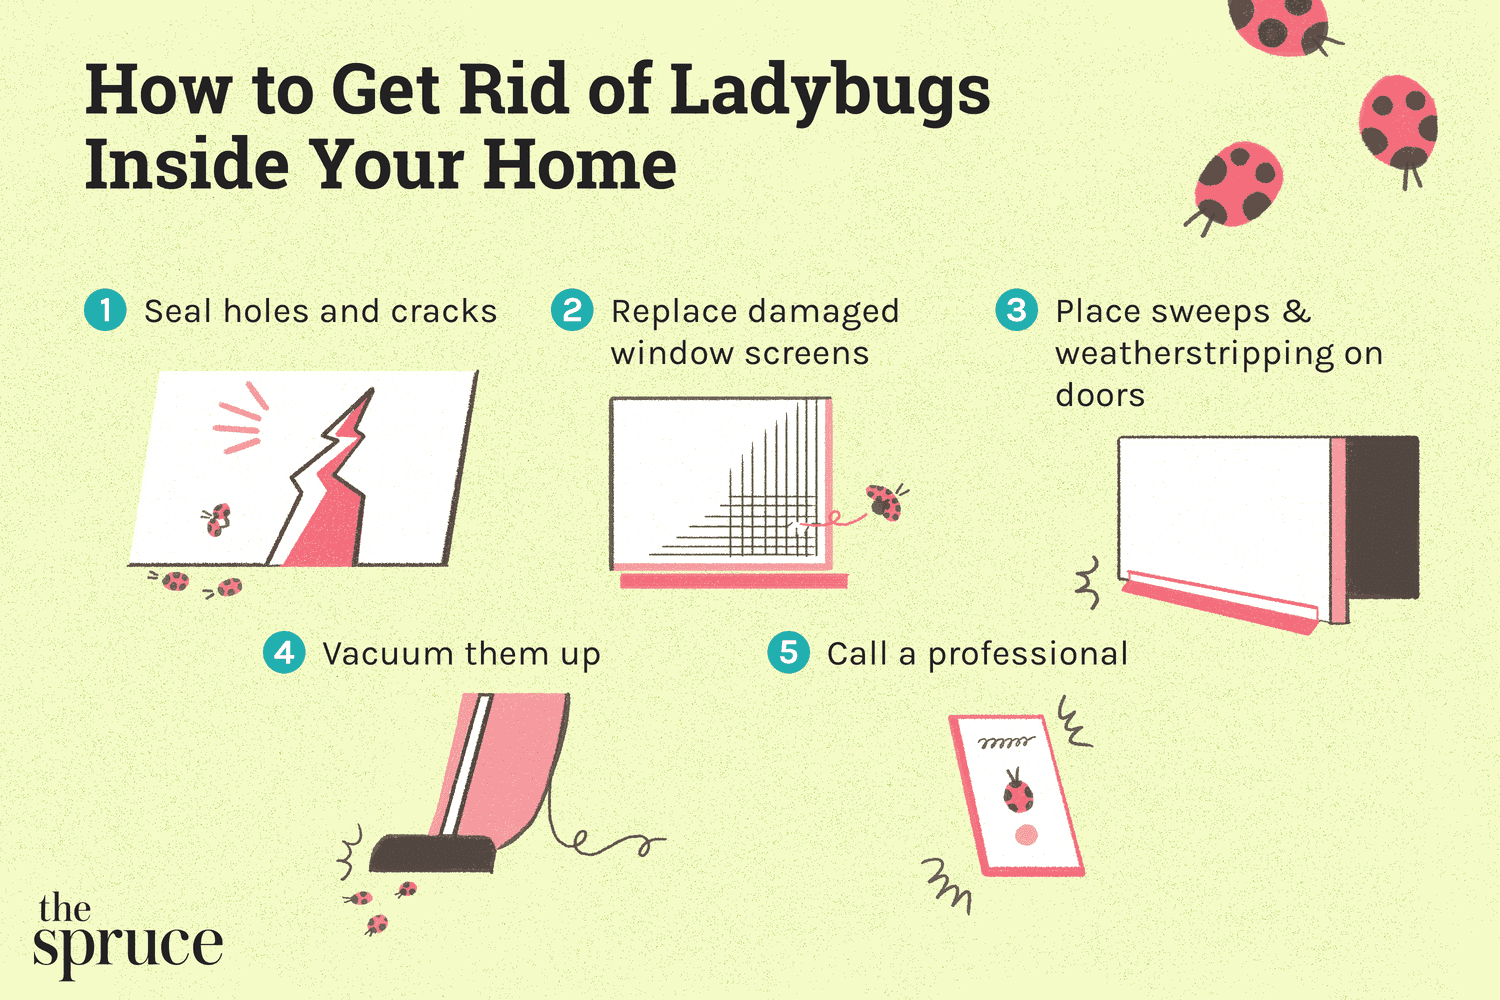 How to Get Rid of Ladybugs Inside Your Home